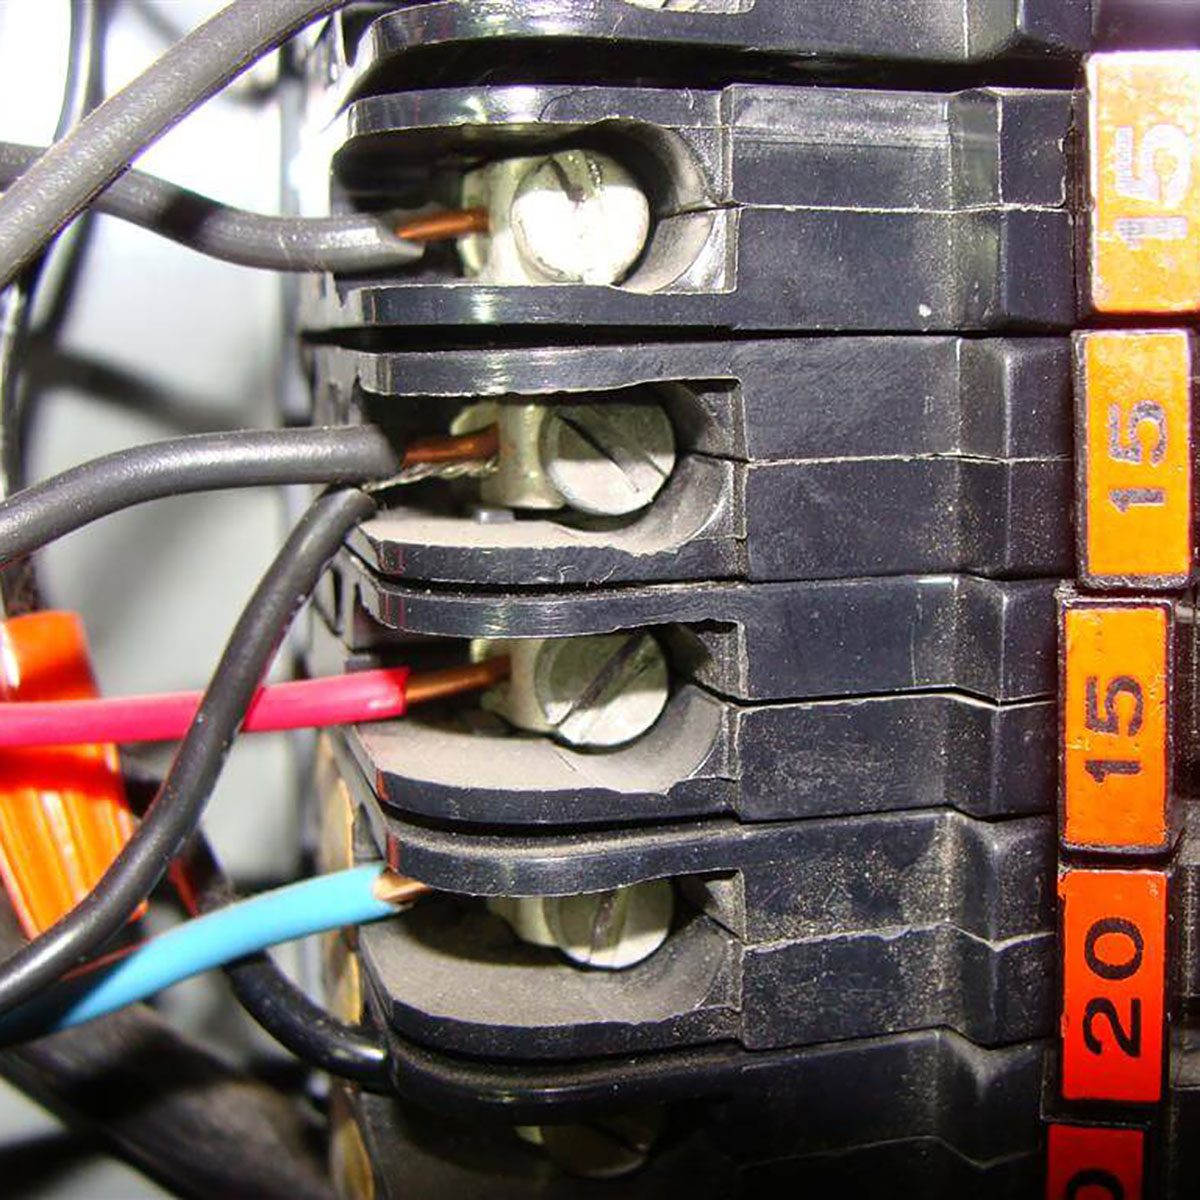 Dual Function Circuit Breakers - Pitfalls of Wiring Devices